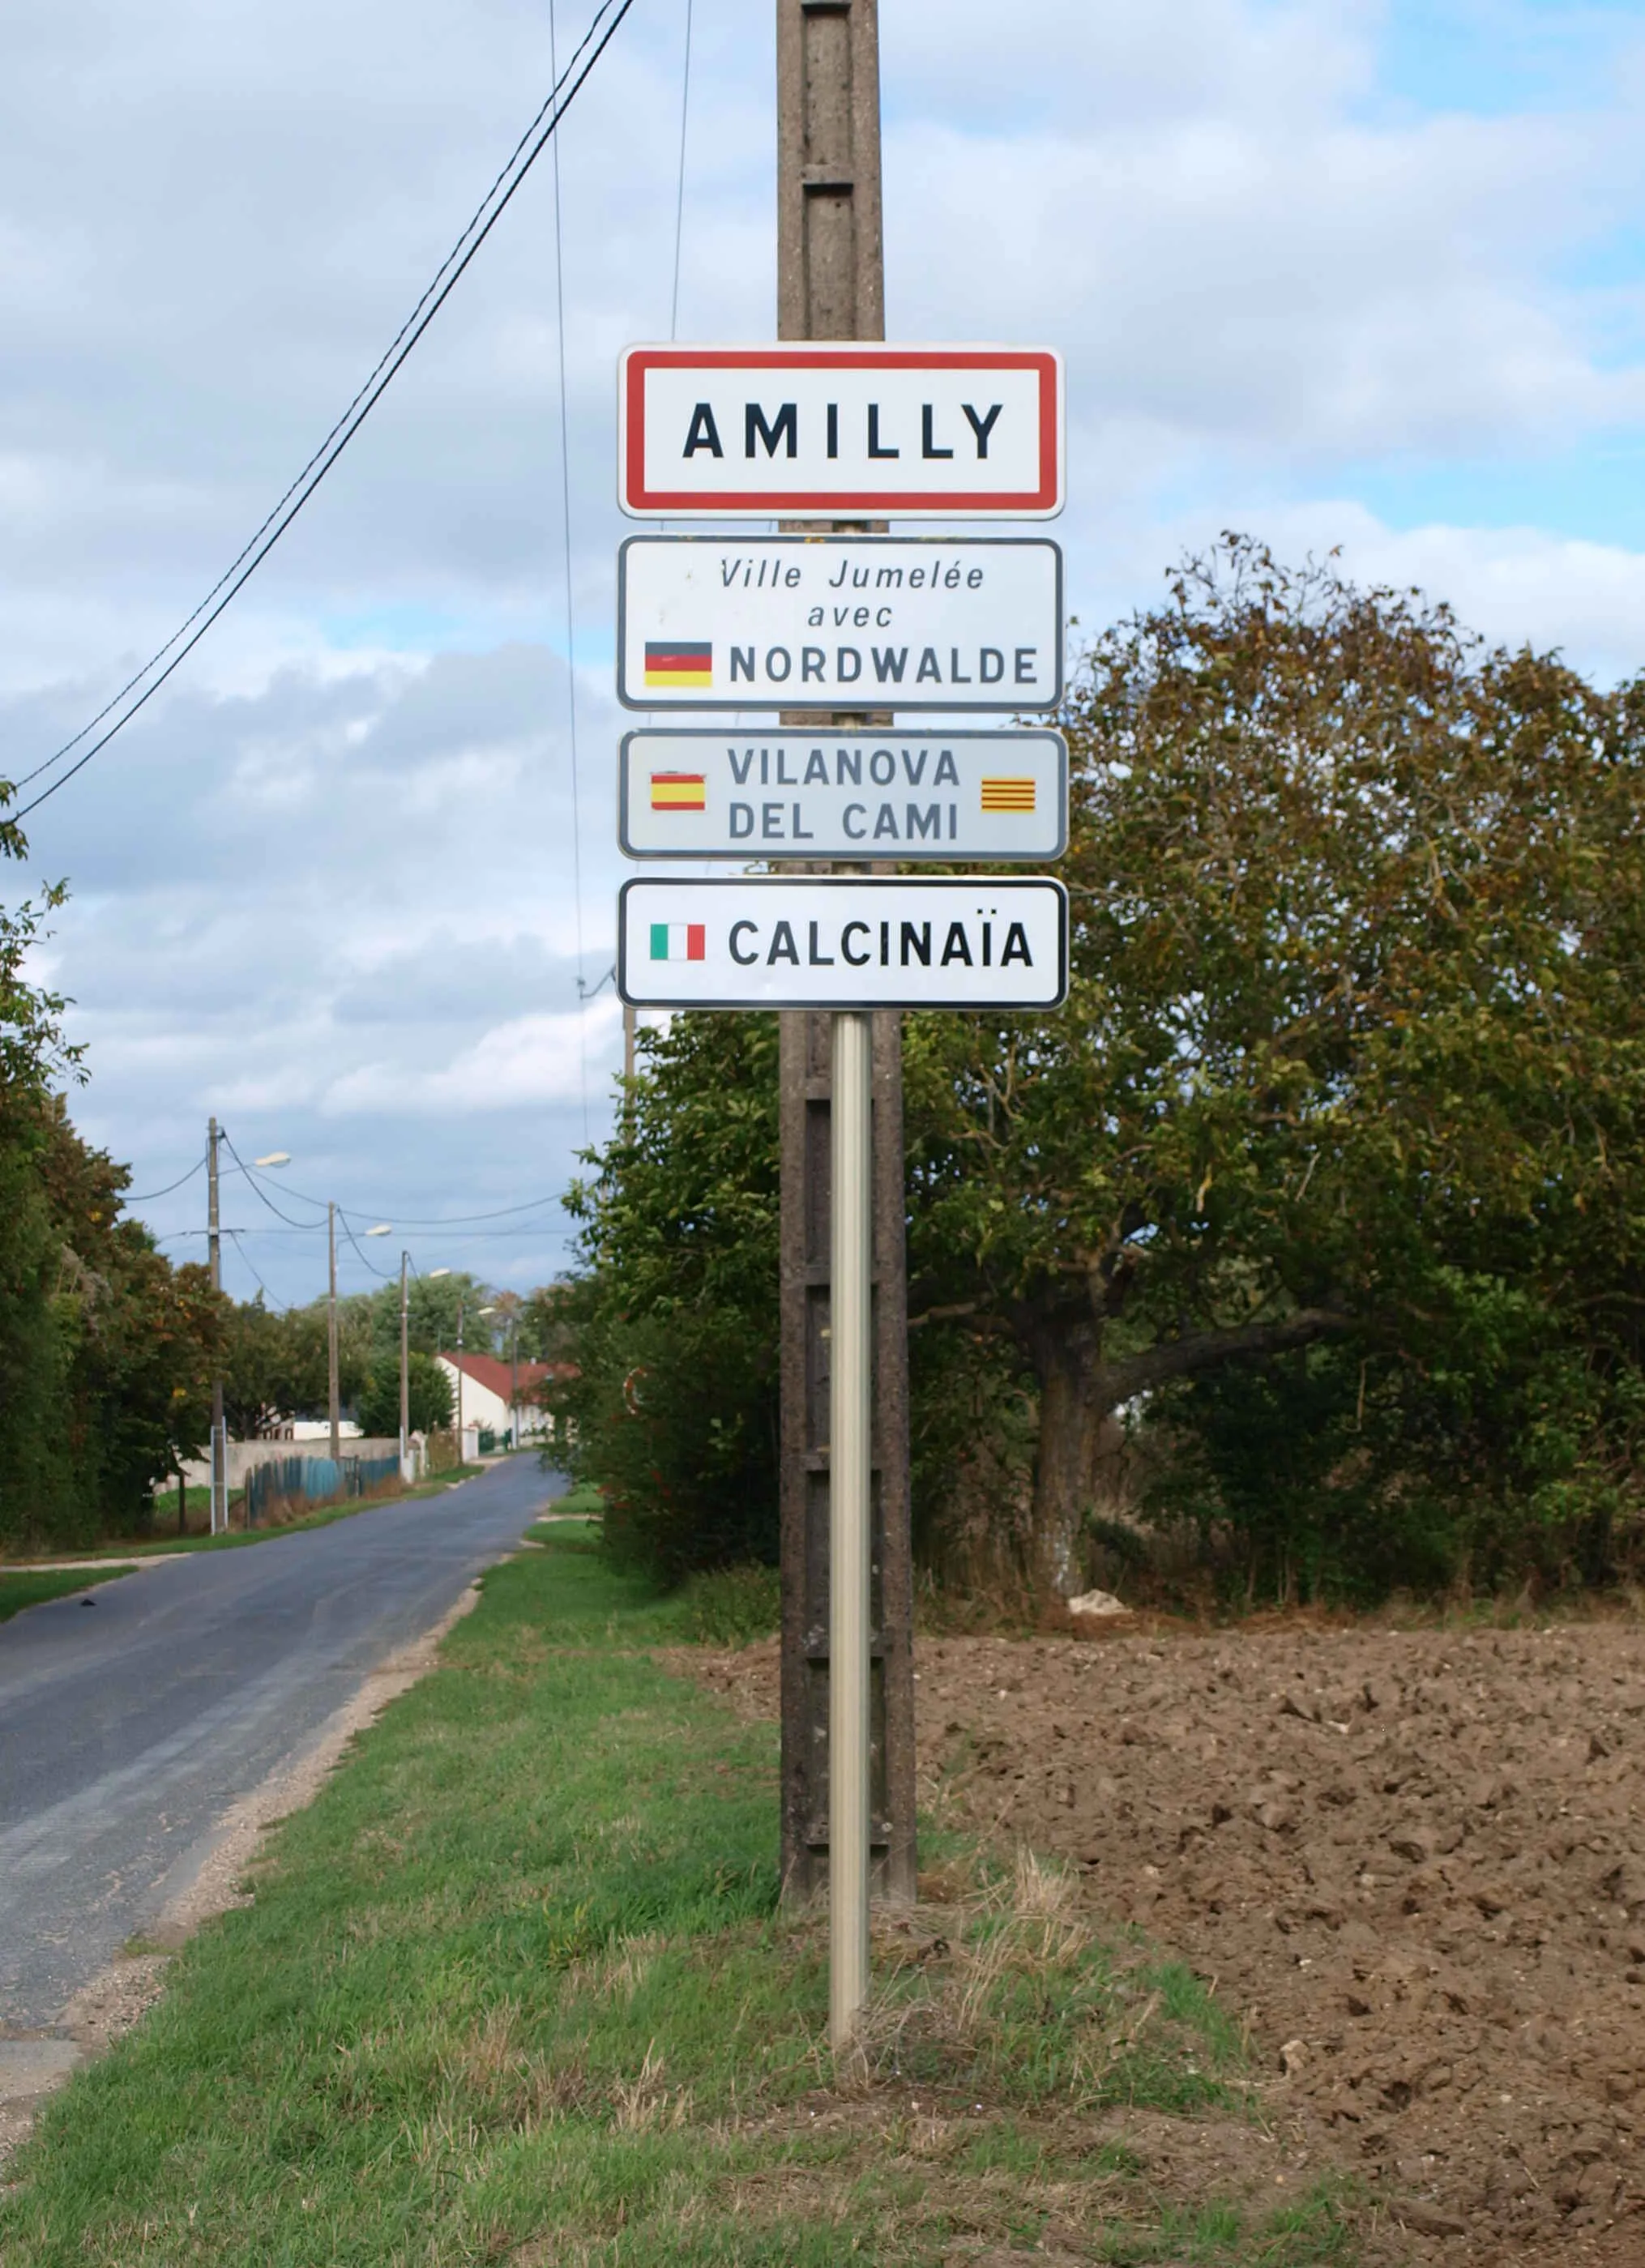 Photo showing: Amilly (Loiret, France) & le canal de Briare